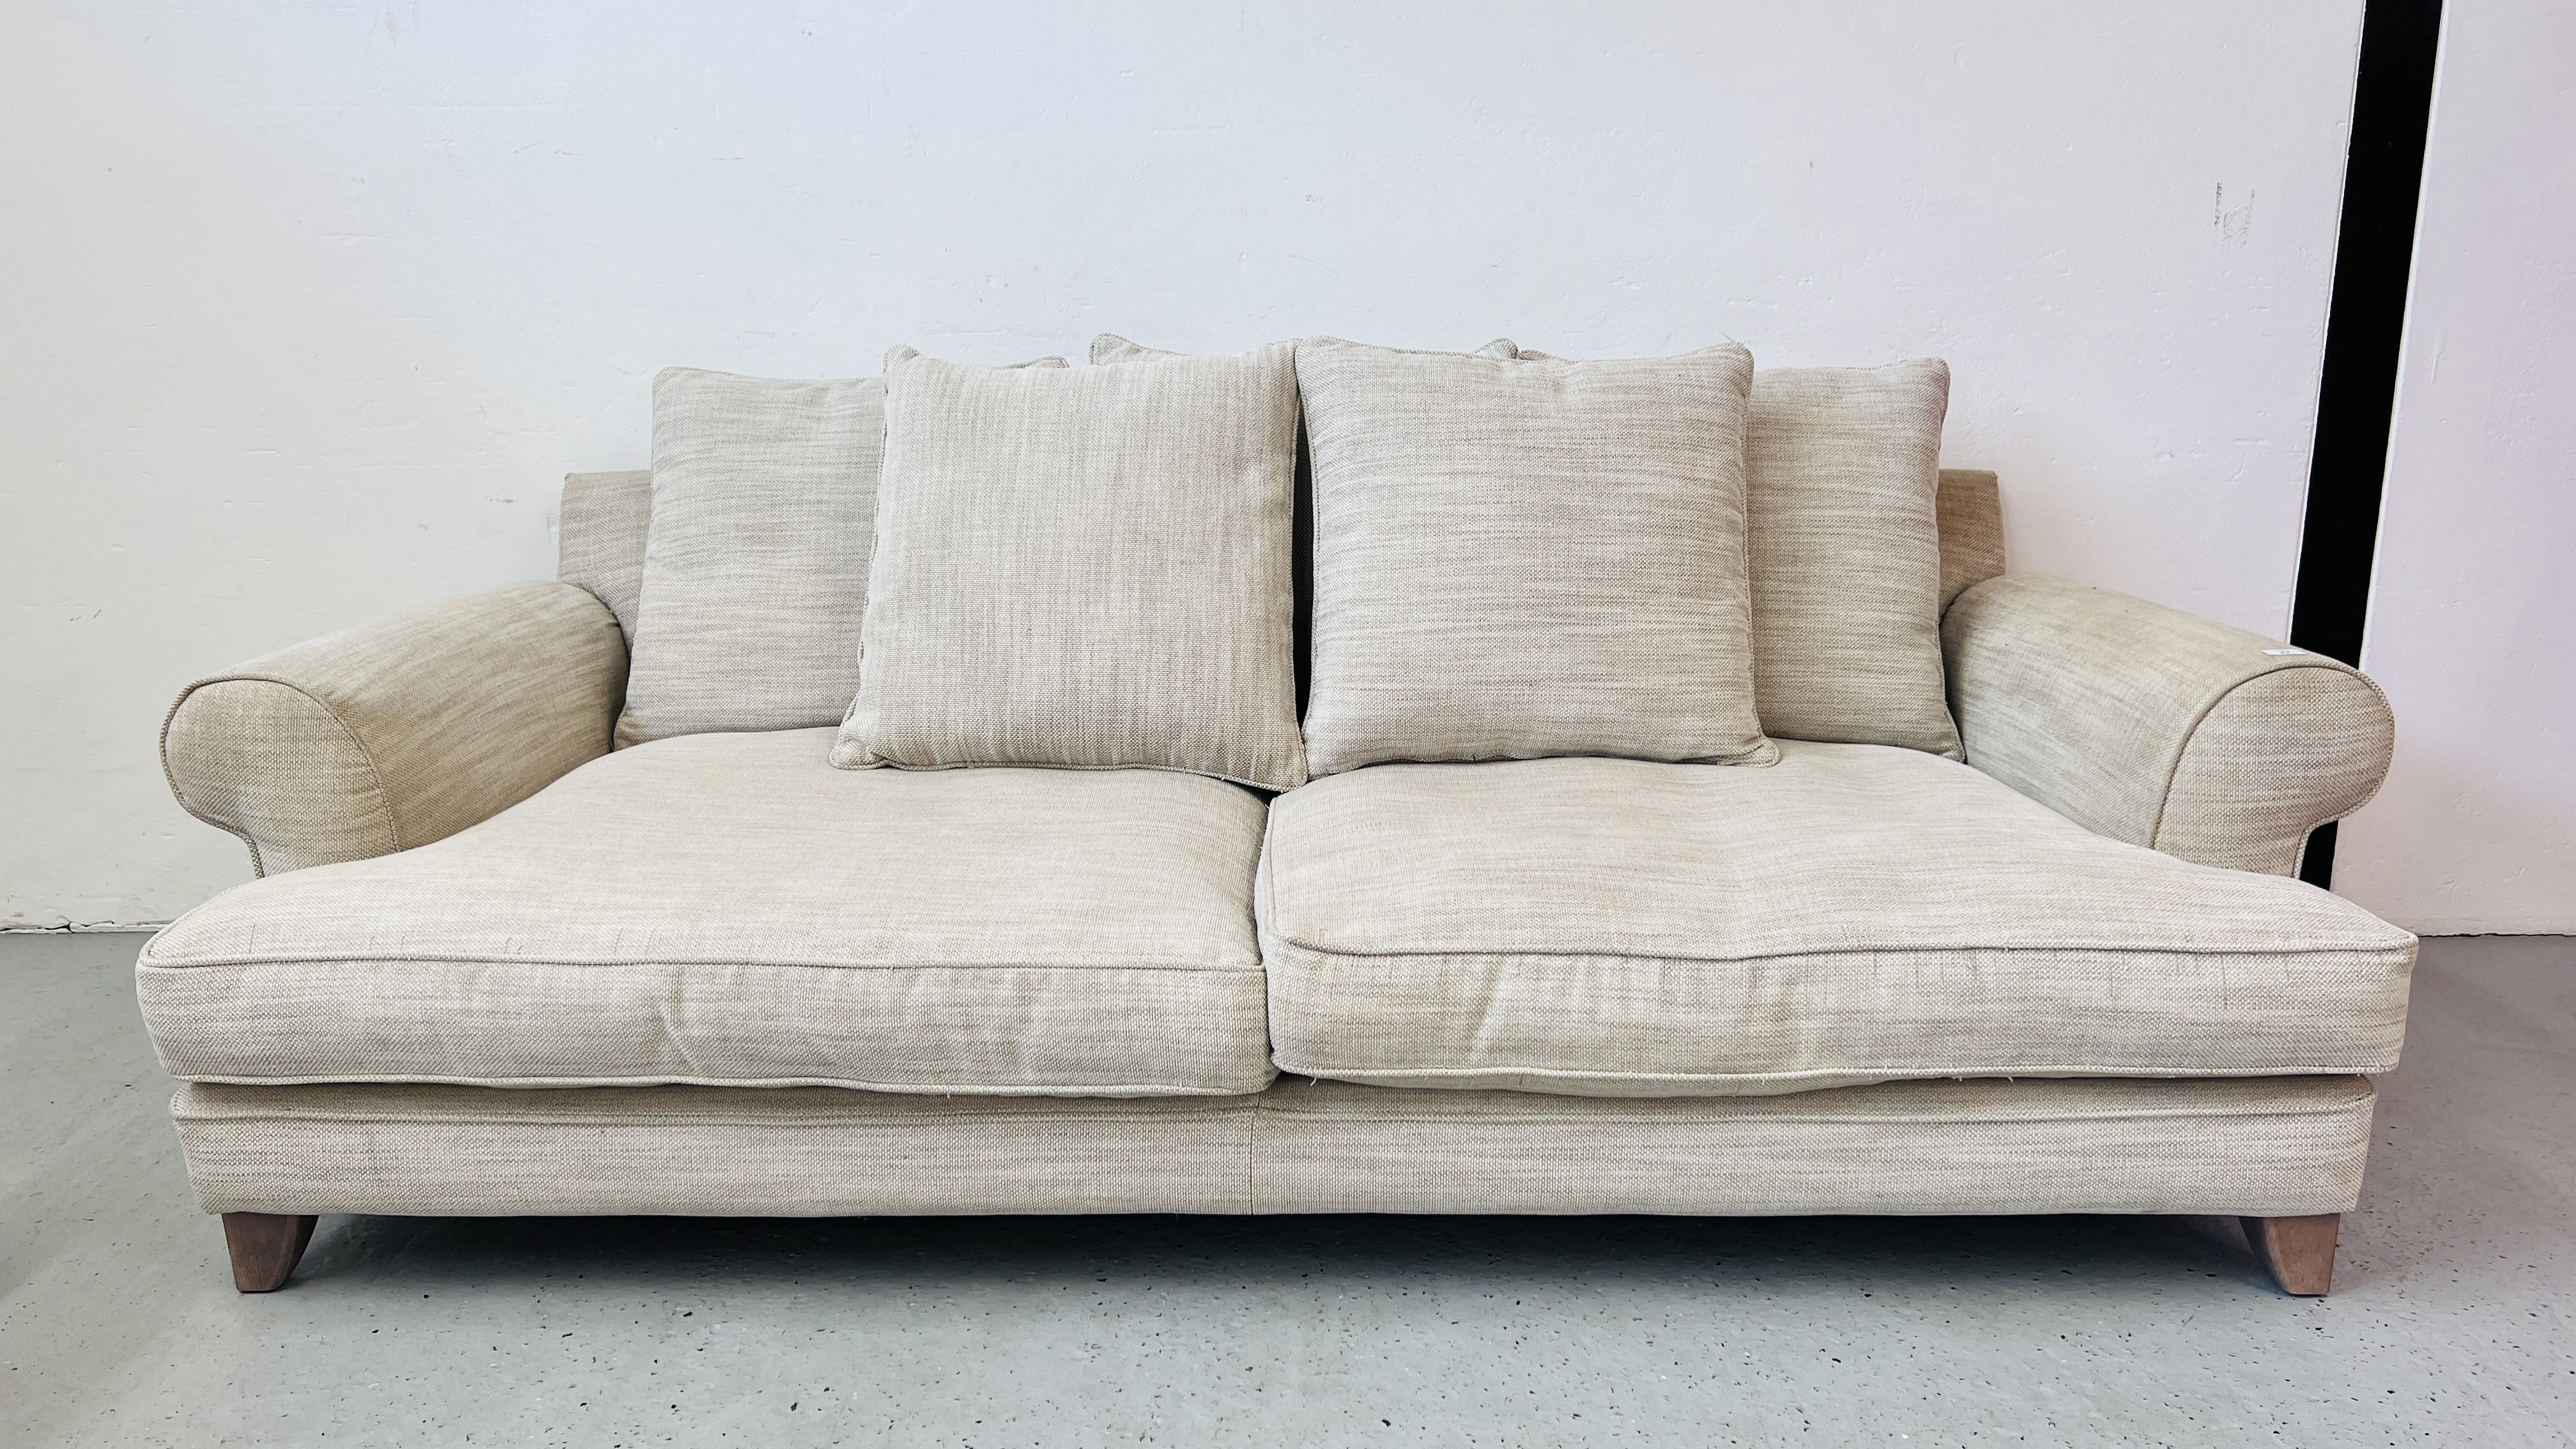 A PAIR OF "THE LOUNGE Co" OATMEAL UPHOLSTERED SOFA'S EACH LENGTH 210CM. - Image 2 of 22